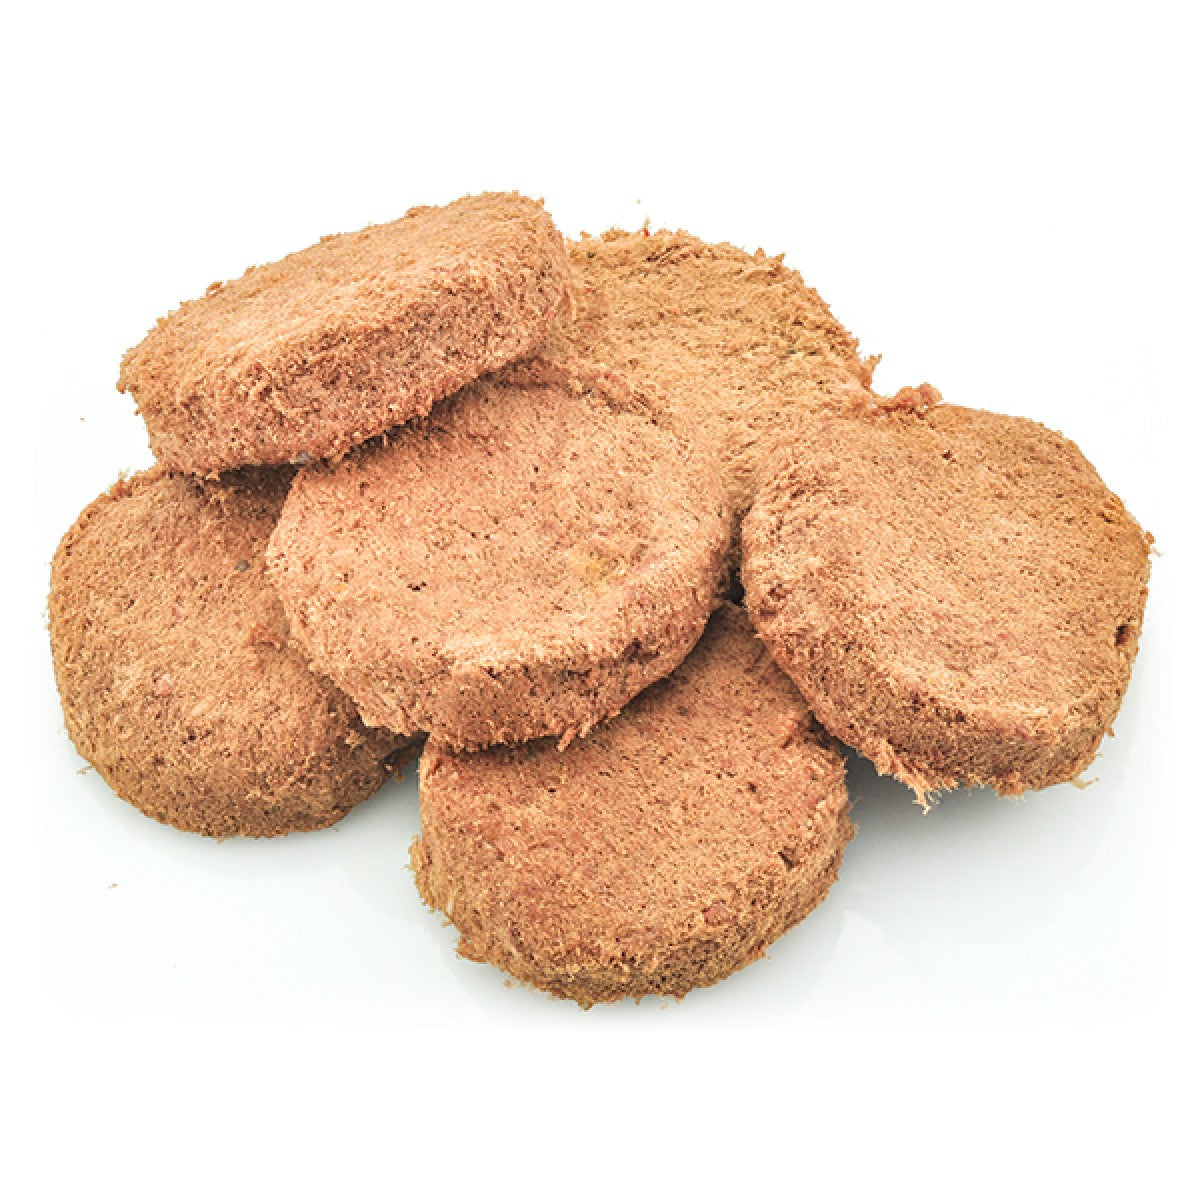 Stella & Chewy's Perfectly Puppy Chicken & Salmon Dinner Patties Freeze-Dried Dog Food